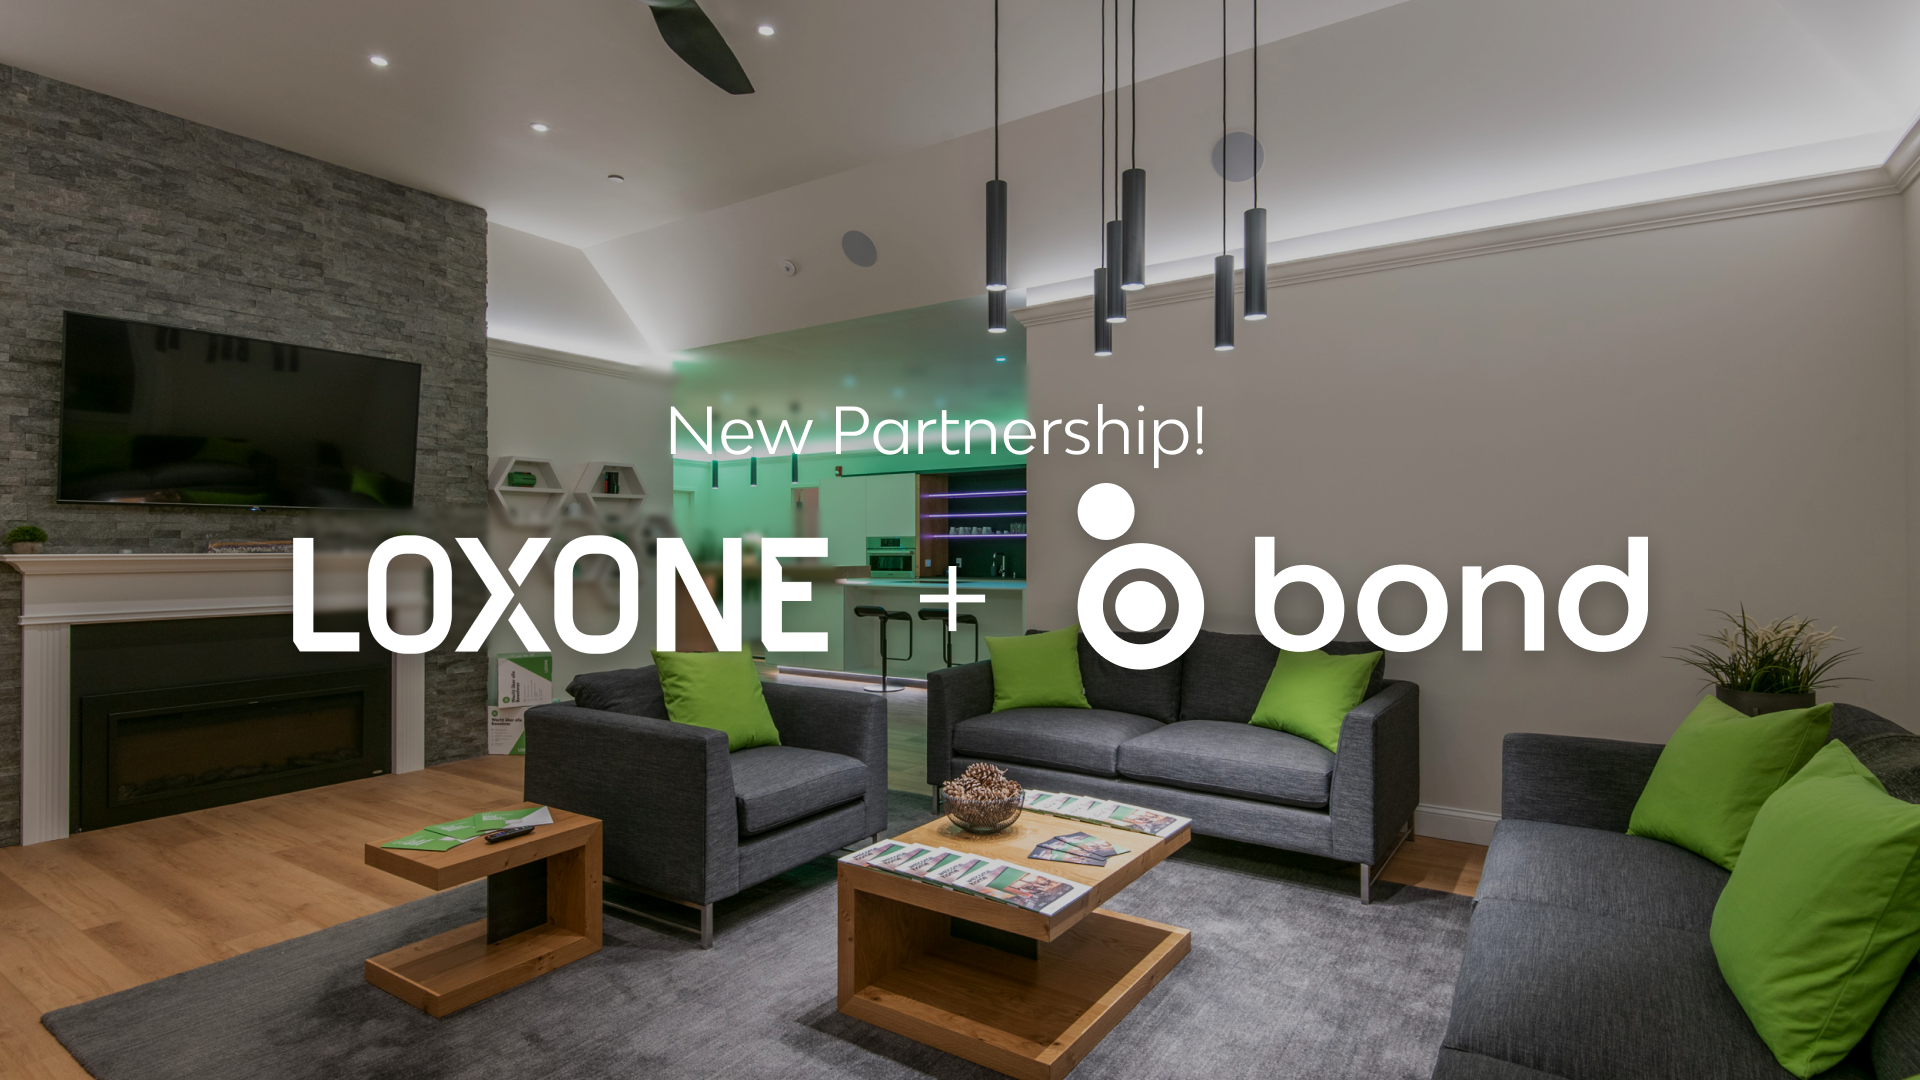 Bond is now compatible with Loxone